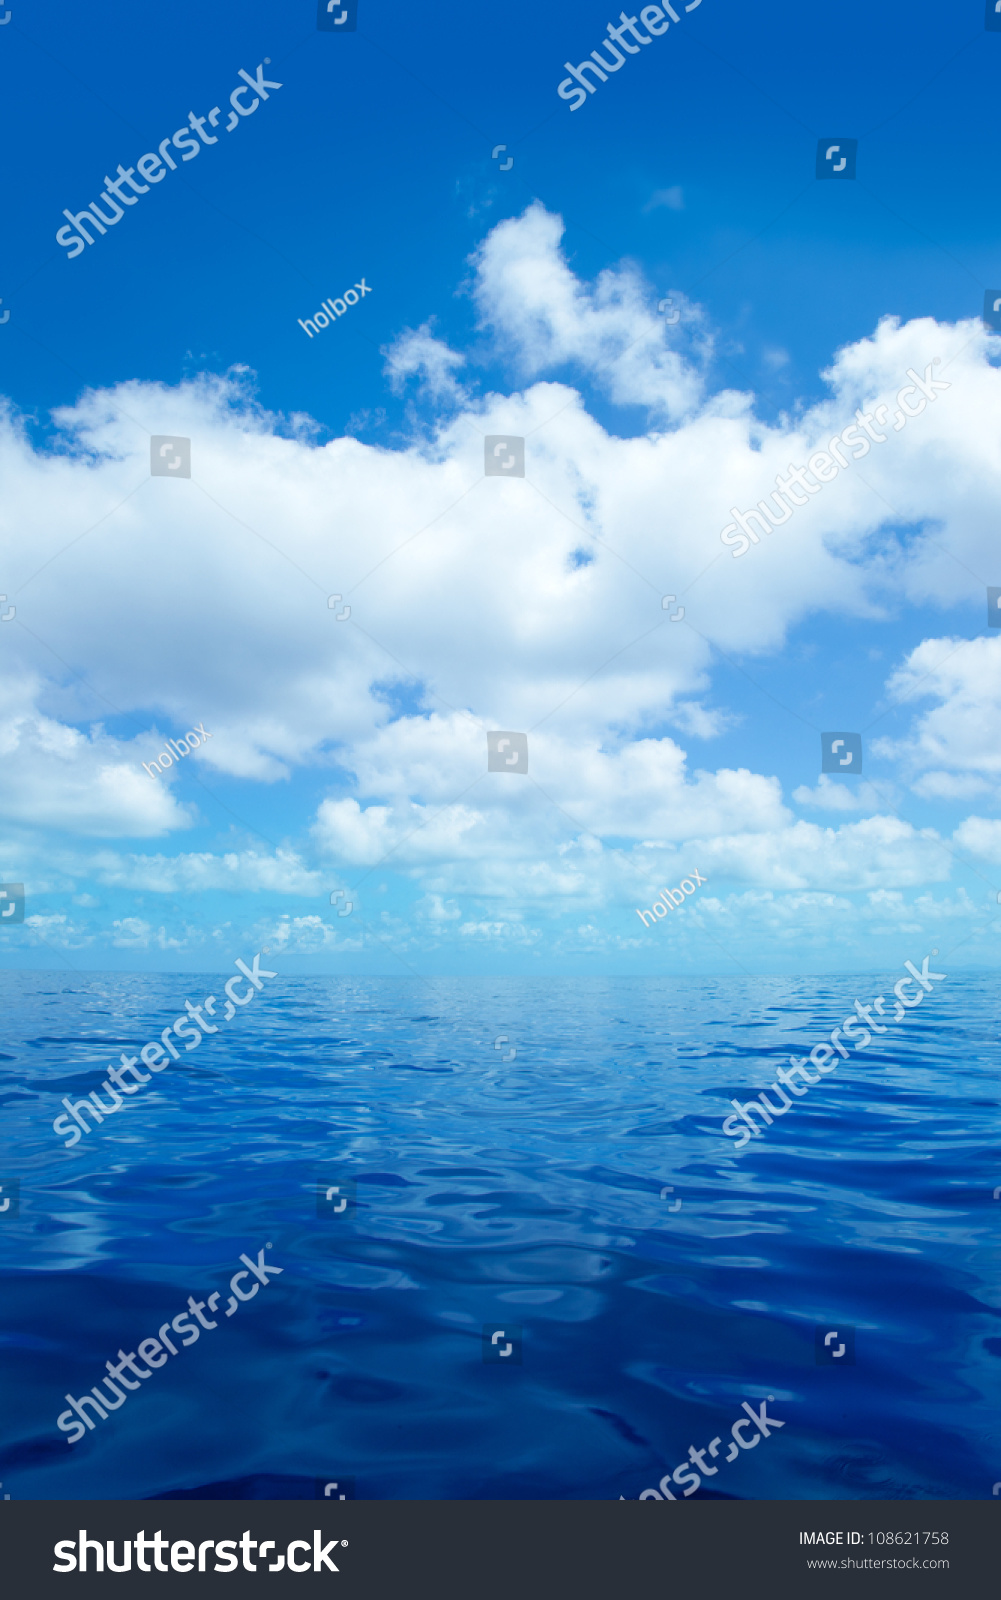 Blue calm sea water in offshore ocean with clouds mirror surface #108621758